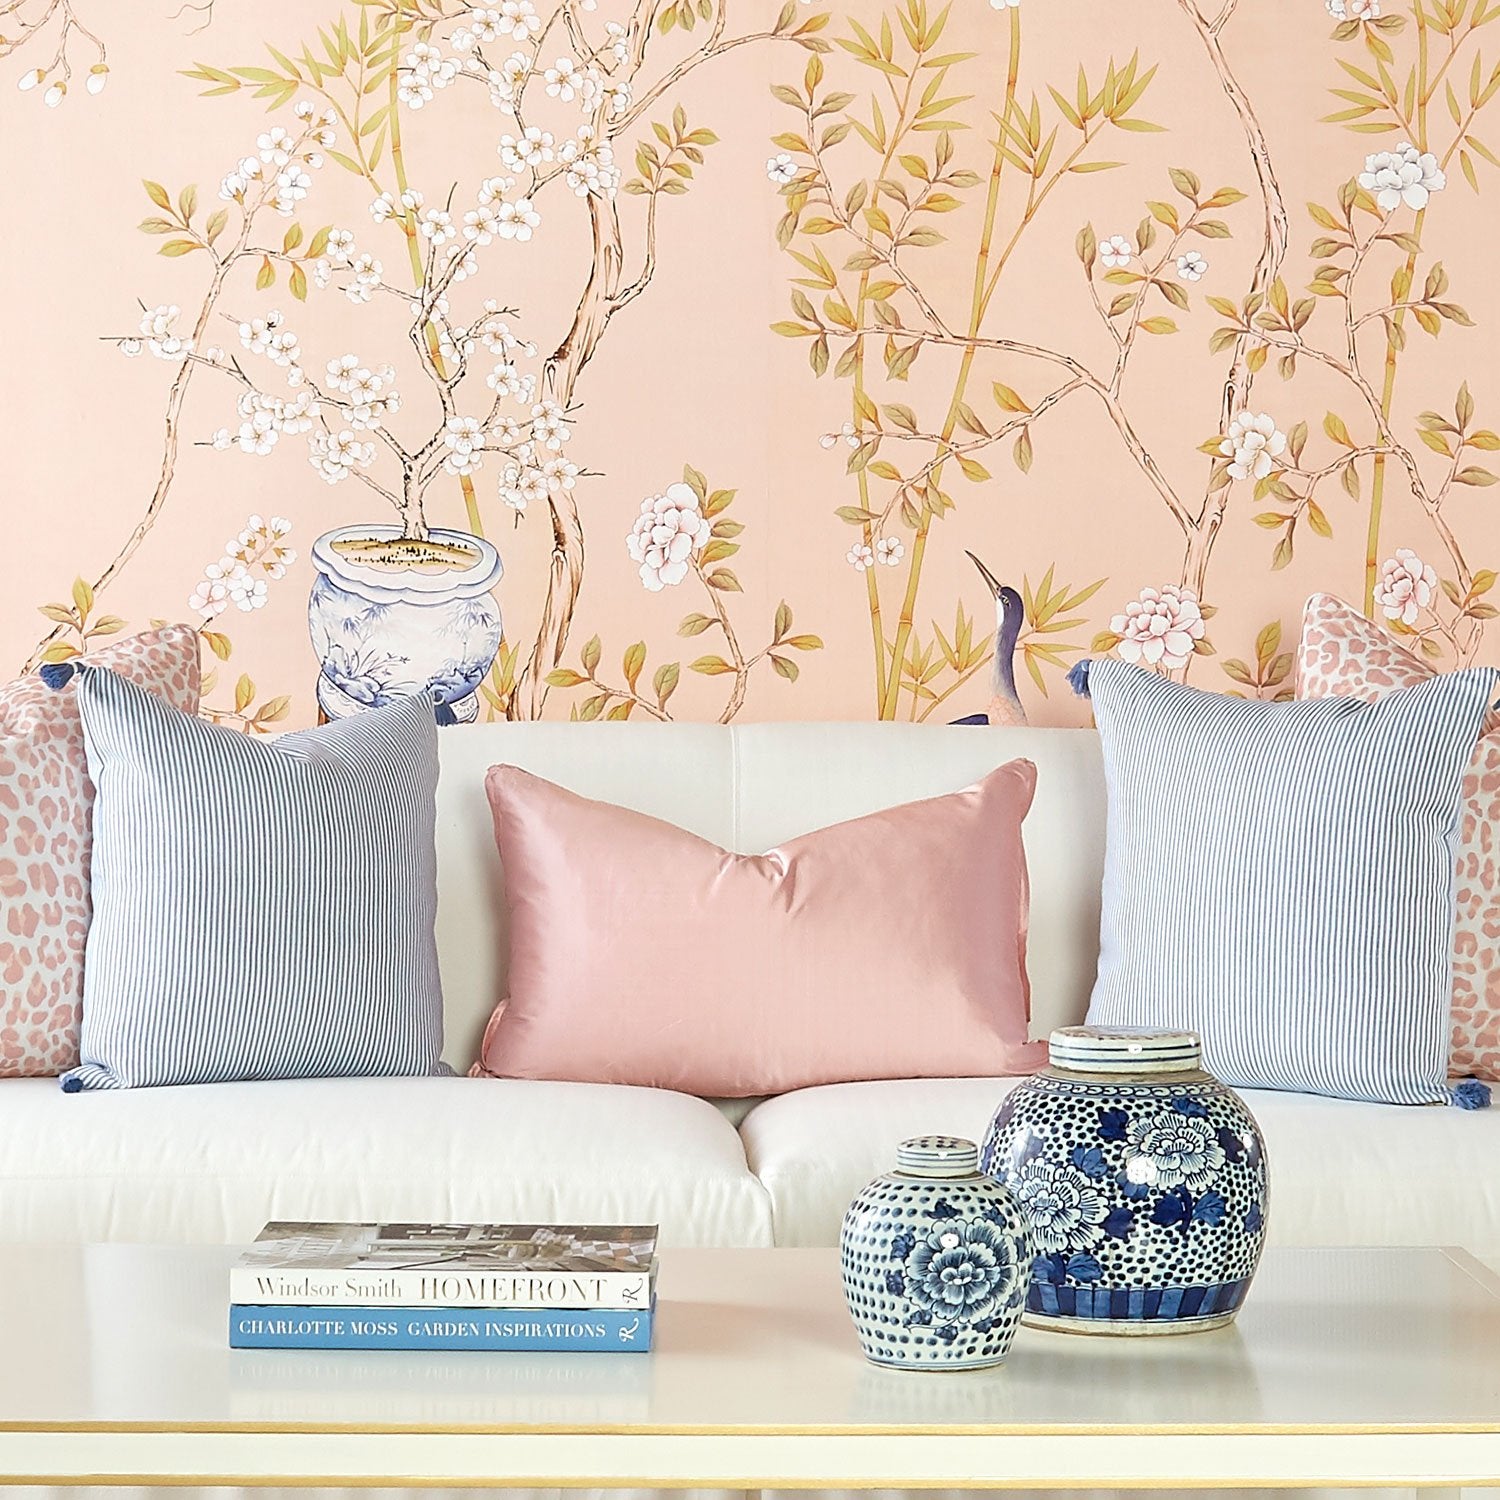 Belfort in Blush Chinoiserie Floral Wallpaper on Wall